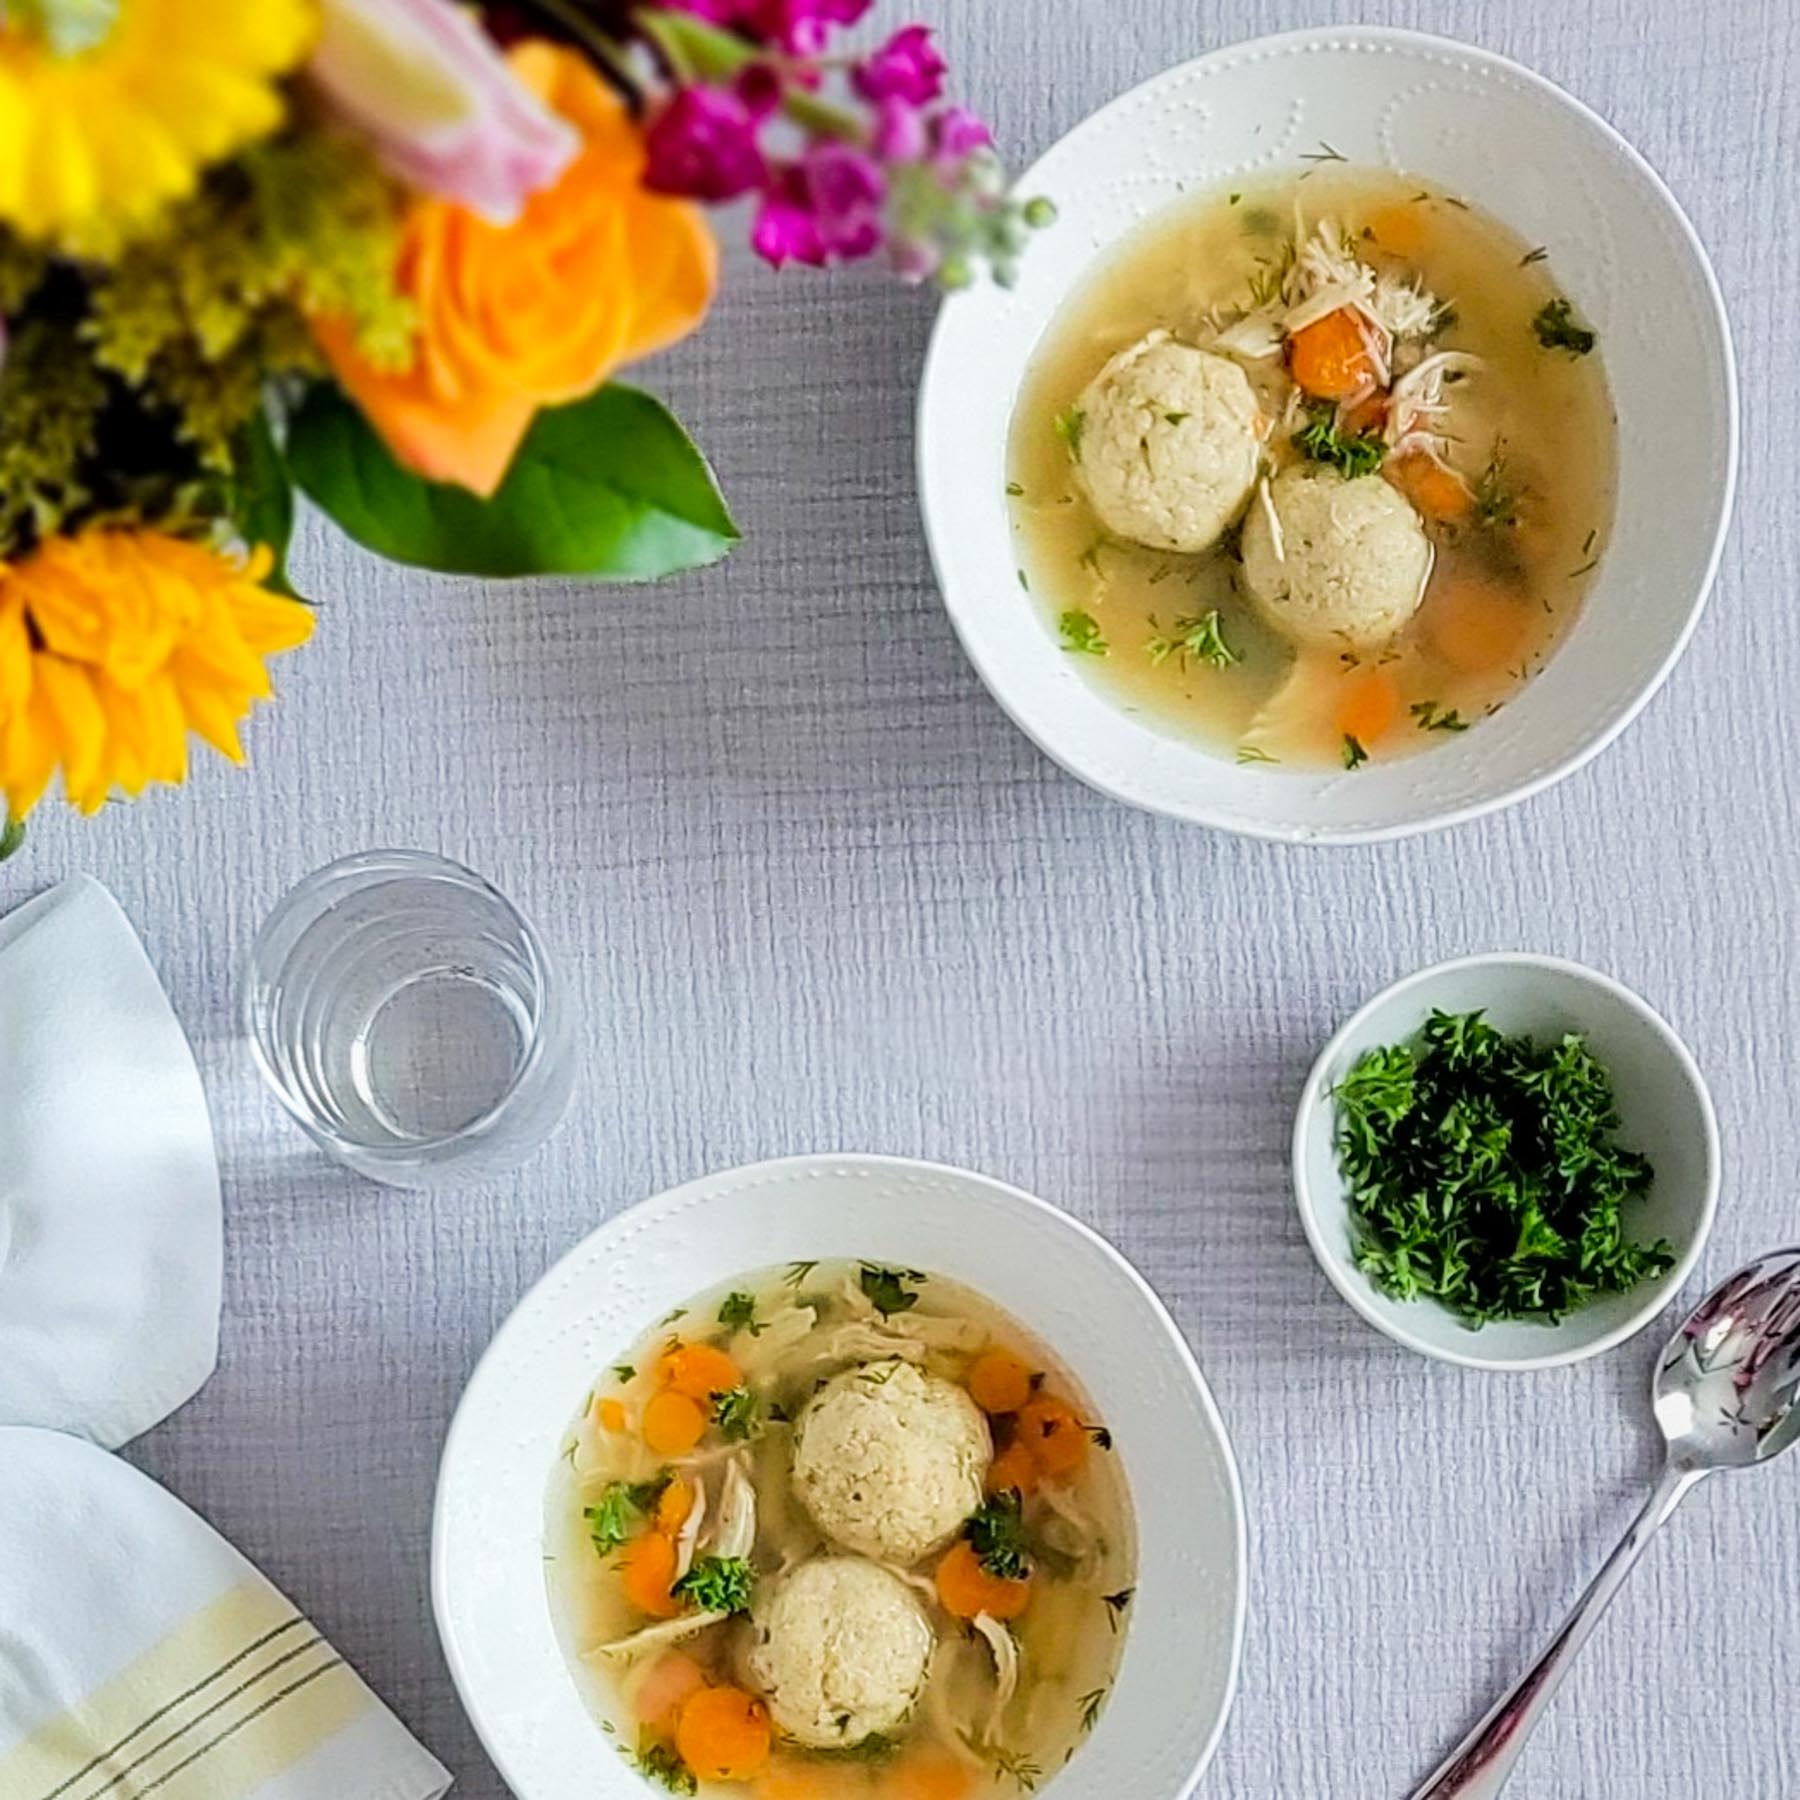 two white bowls of matzo ball soup with carrots, shredded chicken, parsley and 